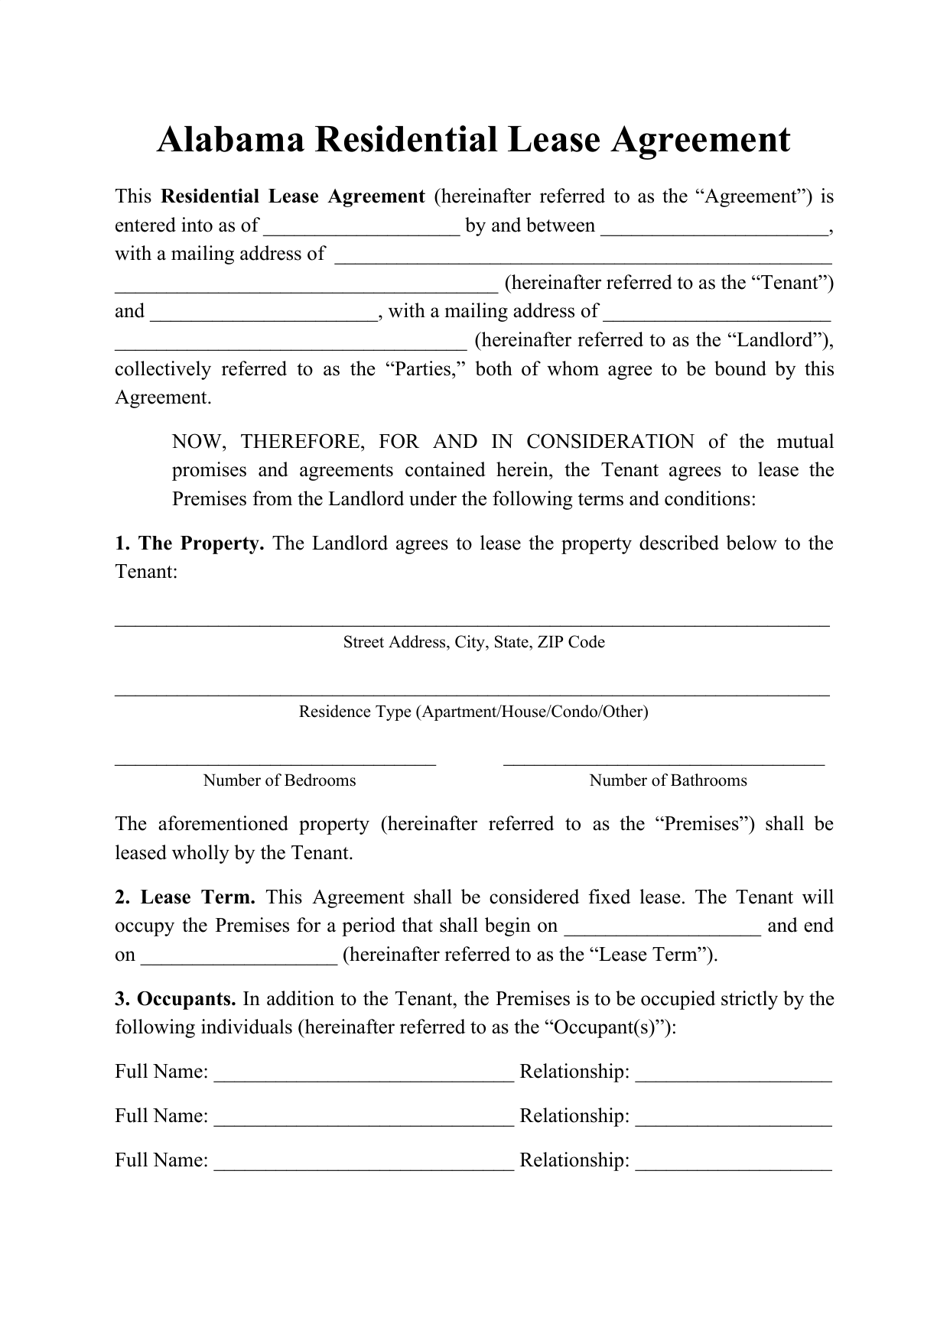 Residential Lease Agreement Template - Alabama, Page 1